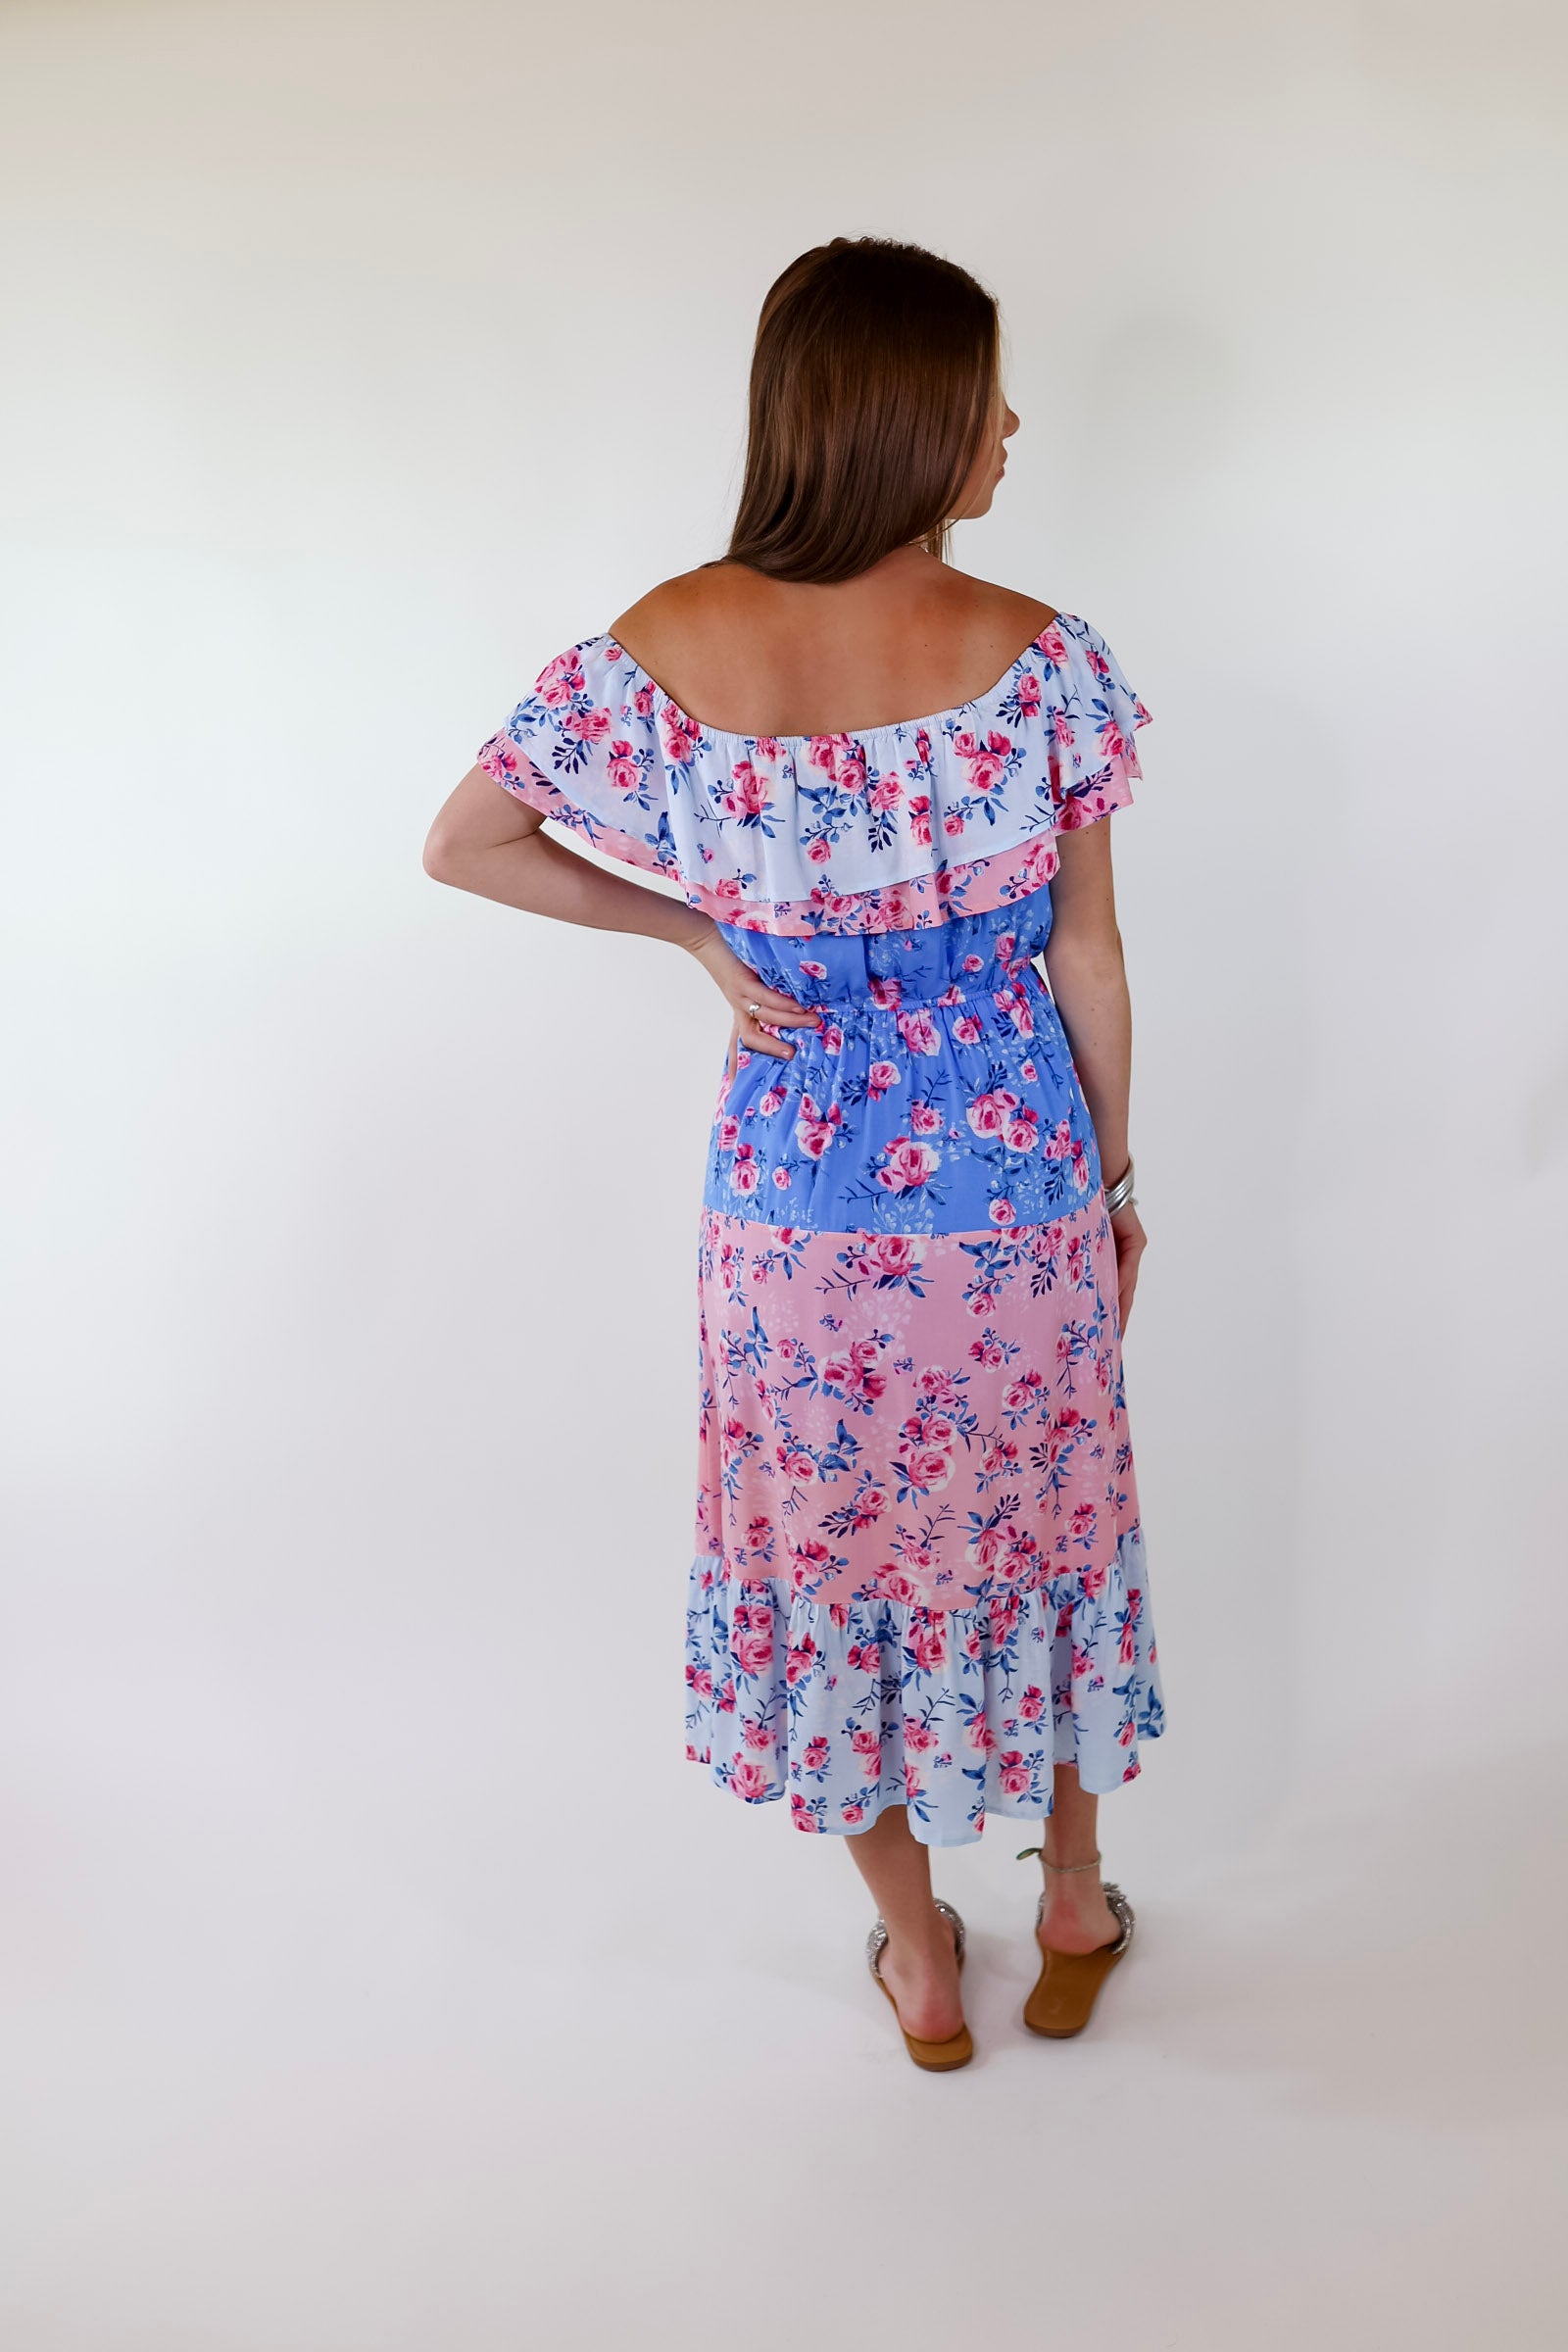 Tides In Tulum Floral Midi Dress with Ruffle Sleeves in Pink and Blue - Giddy Up Glamour Boutique